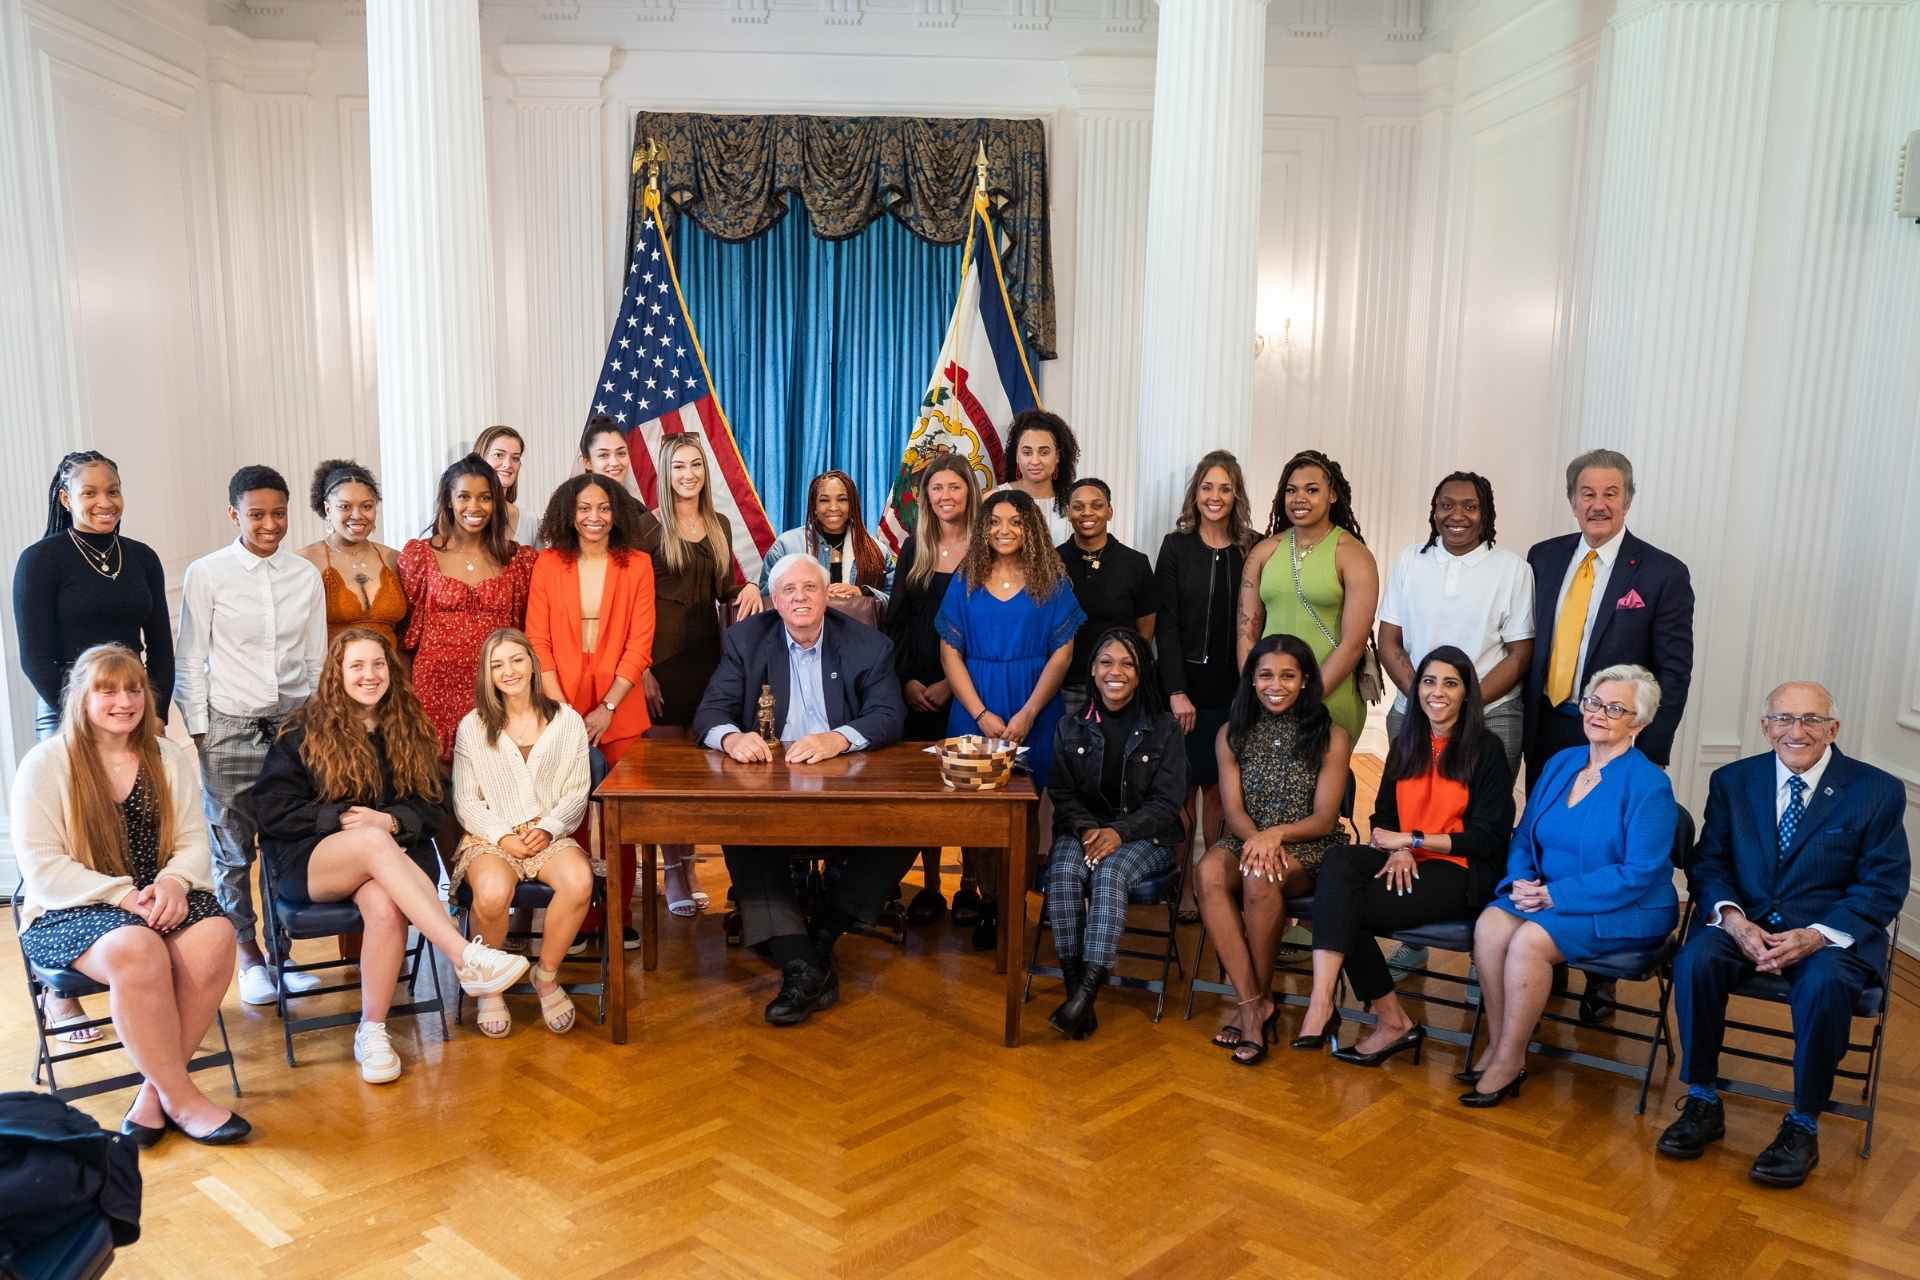 Members of the Glenville State University Lady Pioneers 2022 NCAA Division II Women’s Basketball National Champion team with West Virginia Governor Jim Justice, Glenville State University President Dr. Mark A. Manchin, and longtime Glenville State supporters Ike and Sue Morris. | Photo courtesy WV Governor’s Office